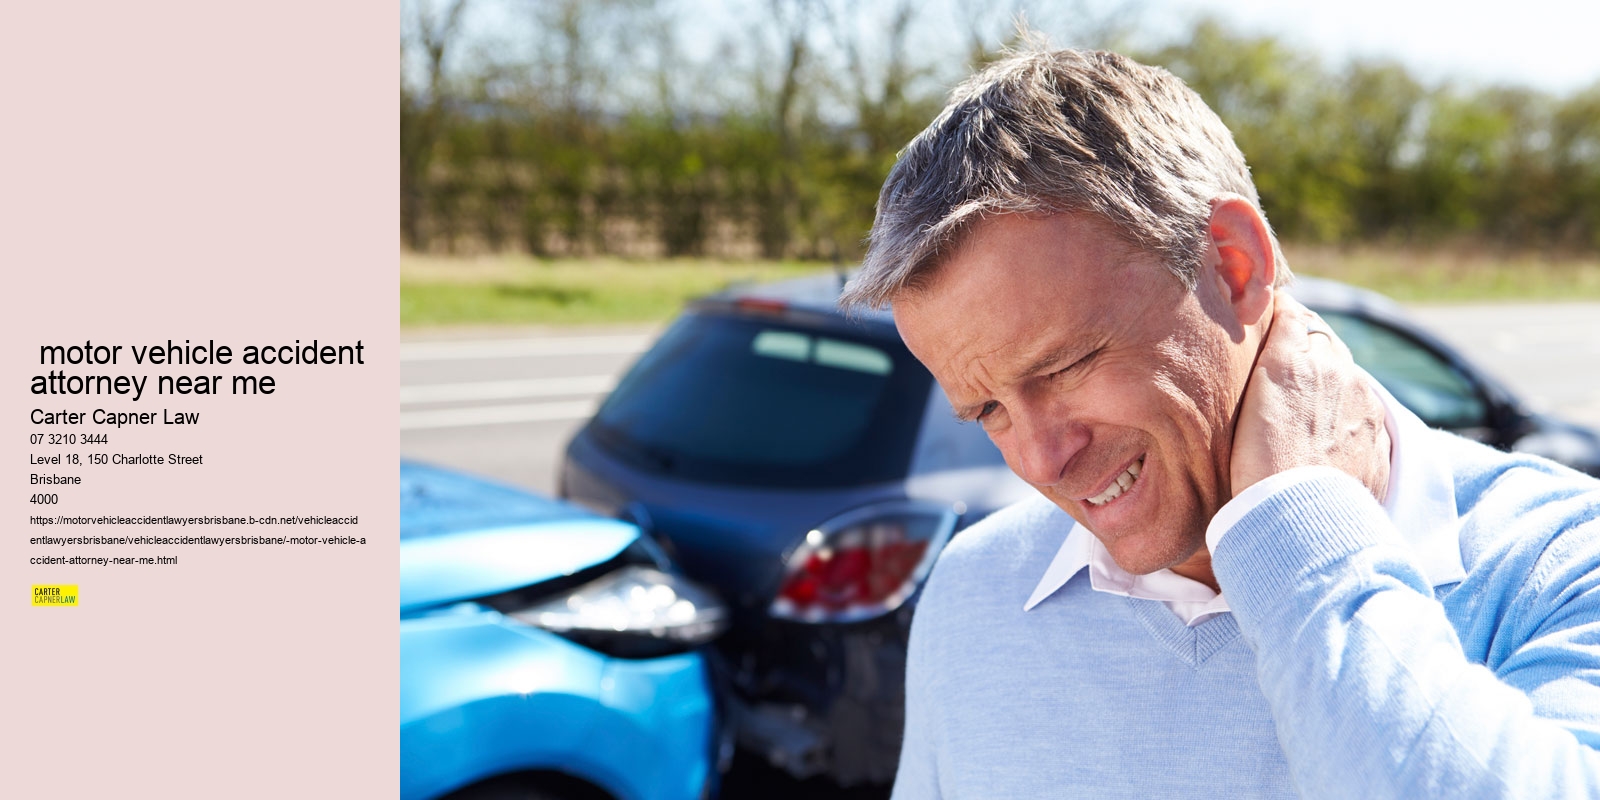  motor vehicle accident attorney near me 